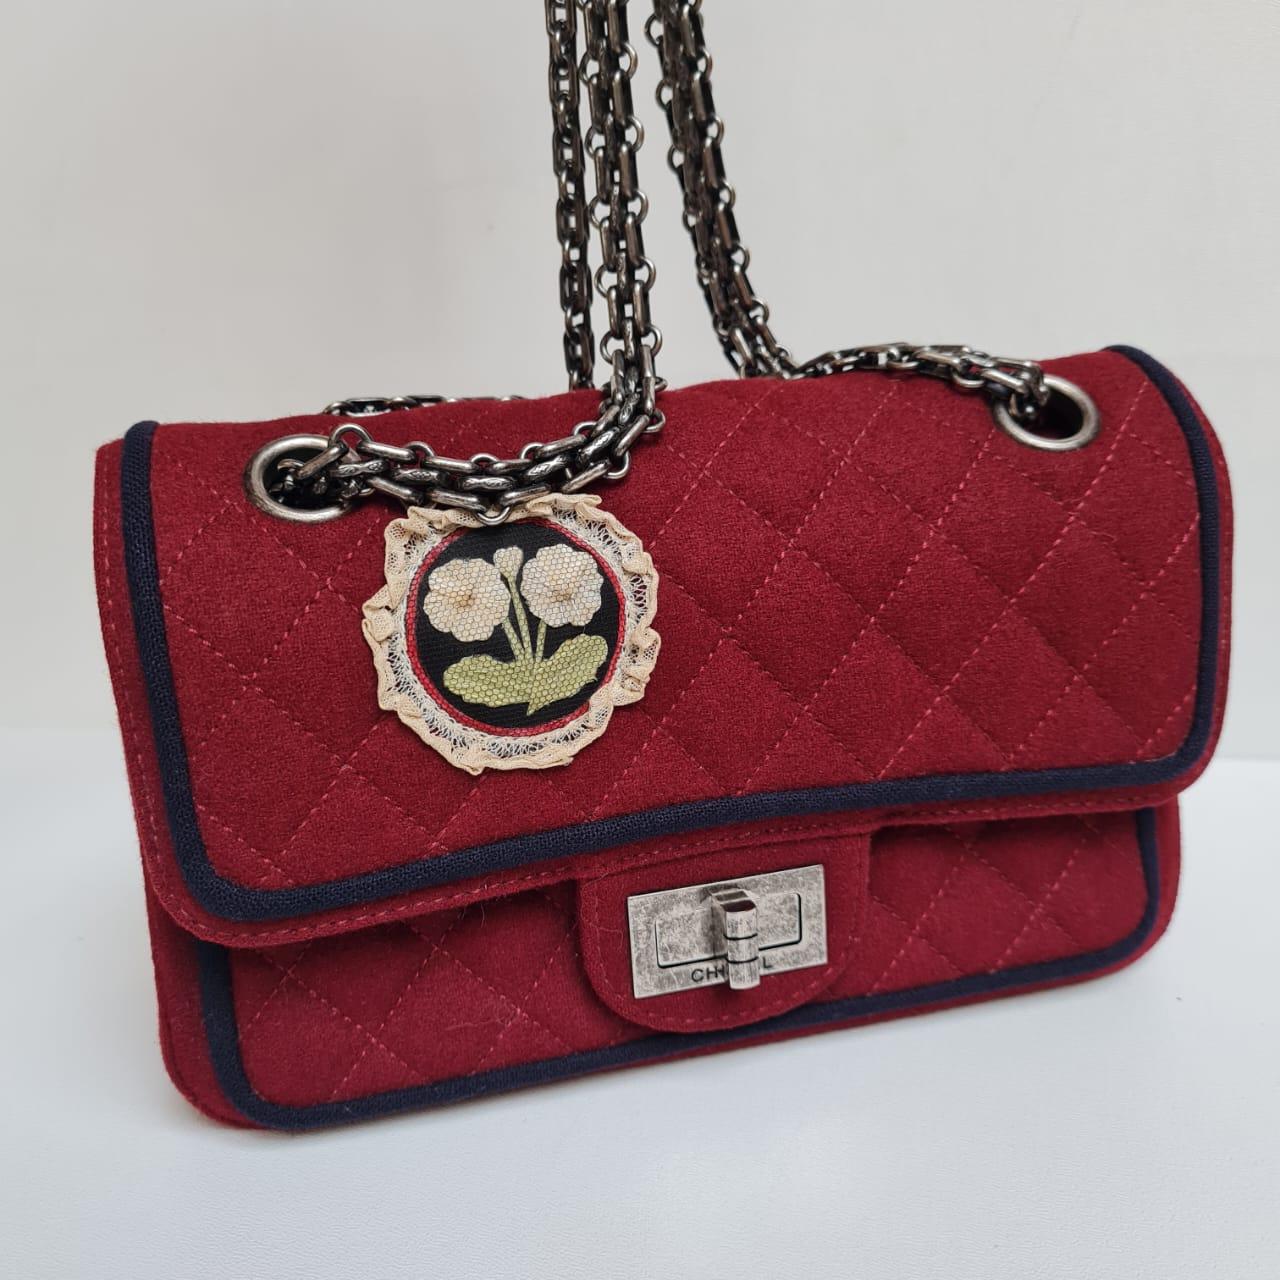 Women's or Men's Chanel 2015 Red Edelweiss Reissue Wool Flap Bag For Sale